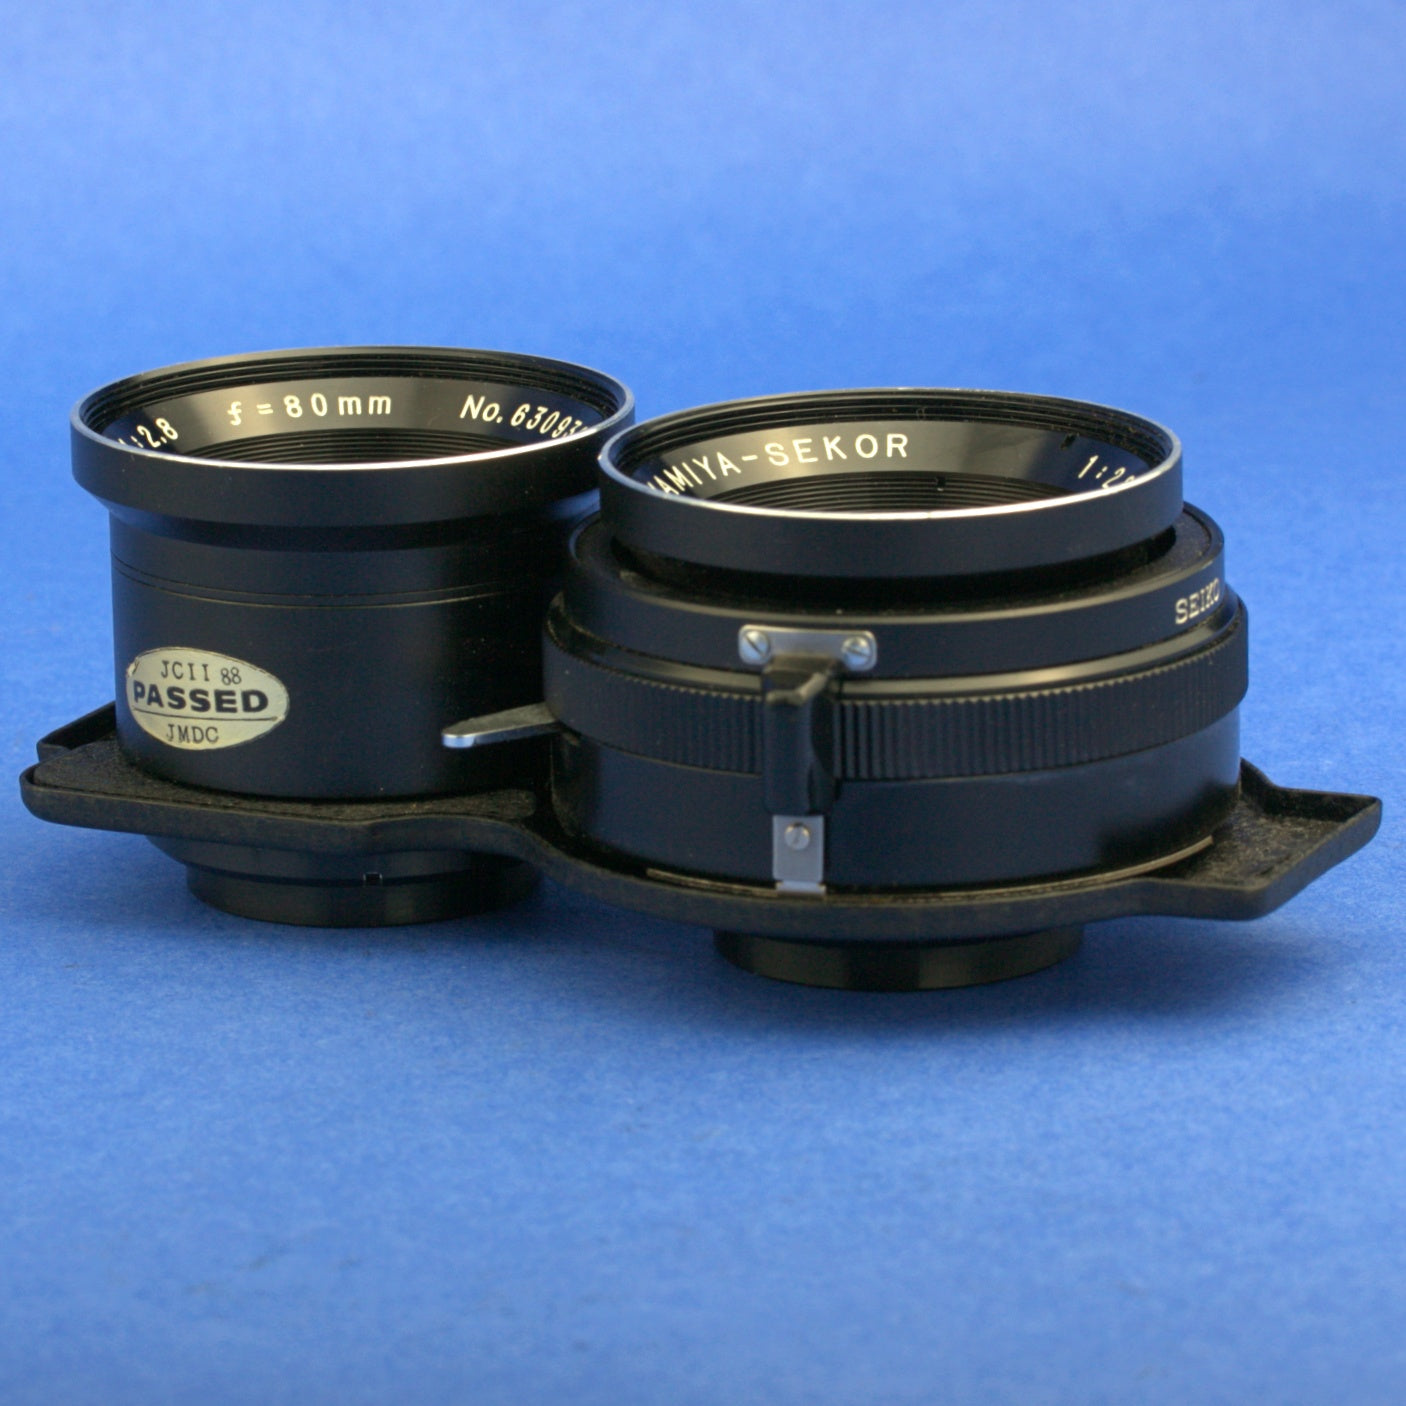 Mamiya 80mm 2.8 TLR Lens for C220, C330 Cameras Near Mint Condition